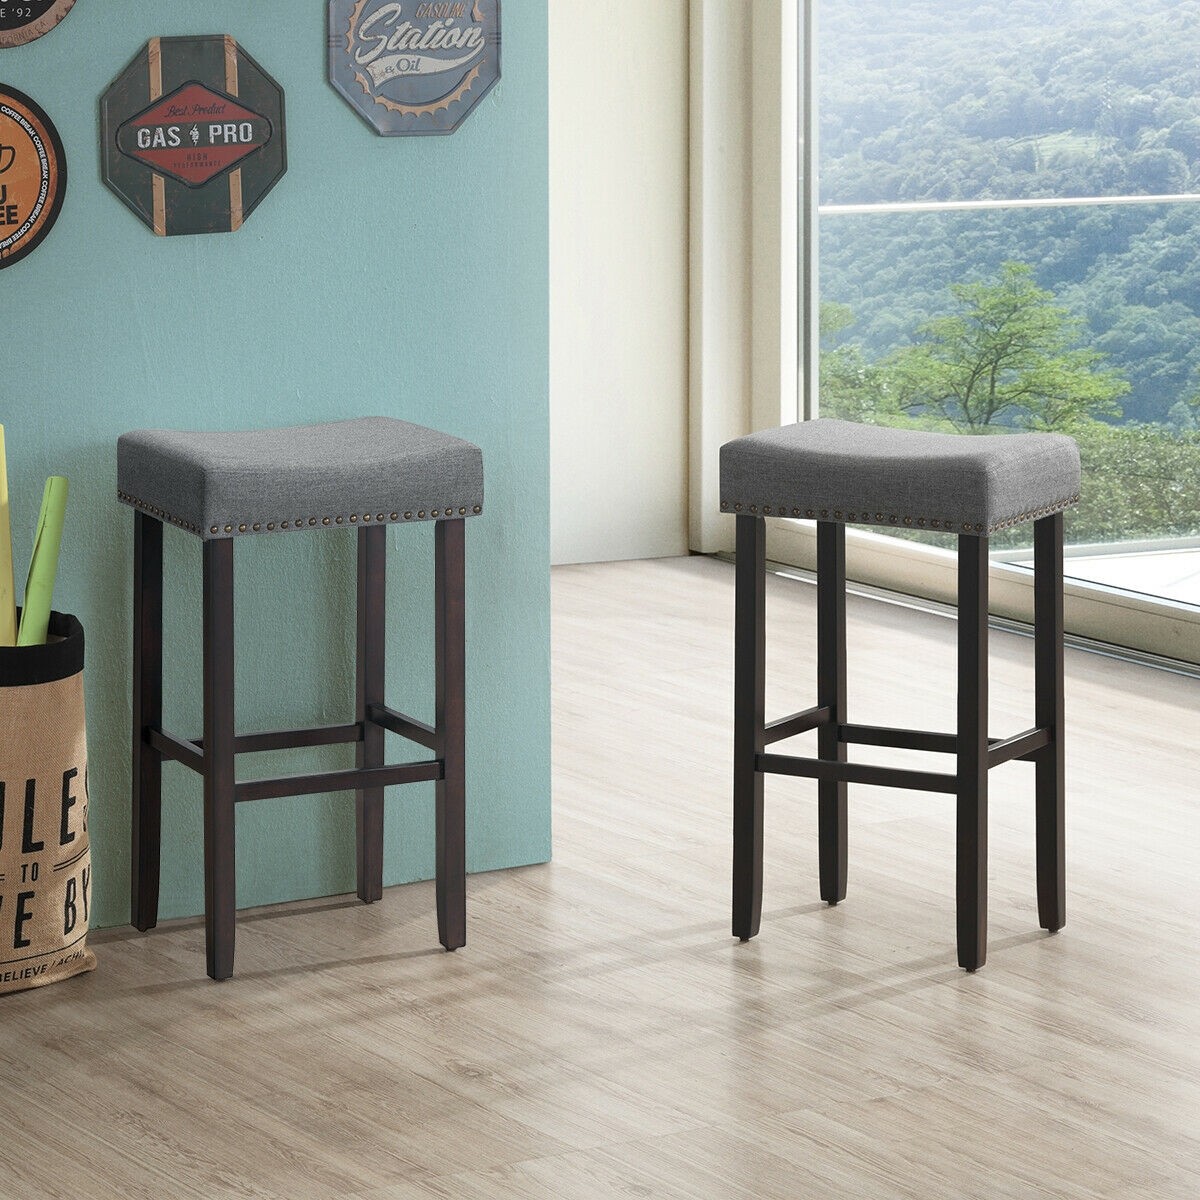 2 Pcs 29.5 in. Saddle Bar Stools With Fabric Seat And Wood Legs